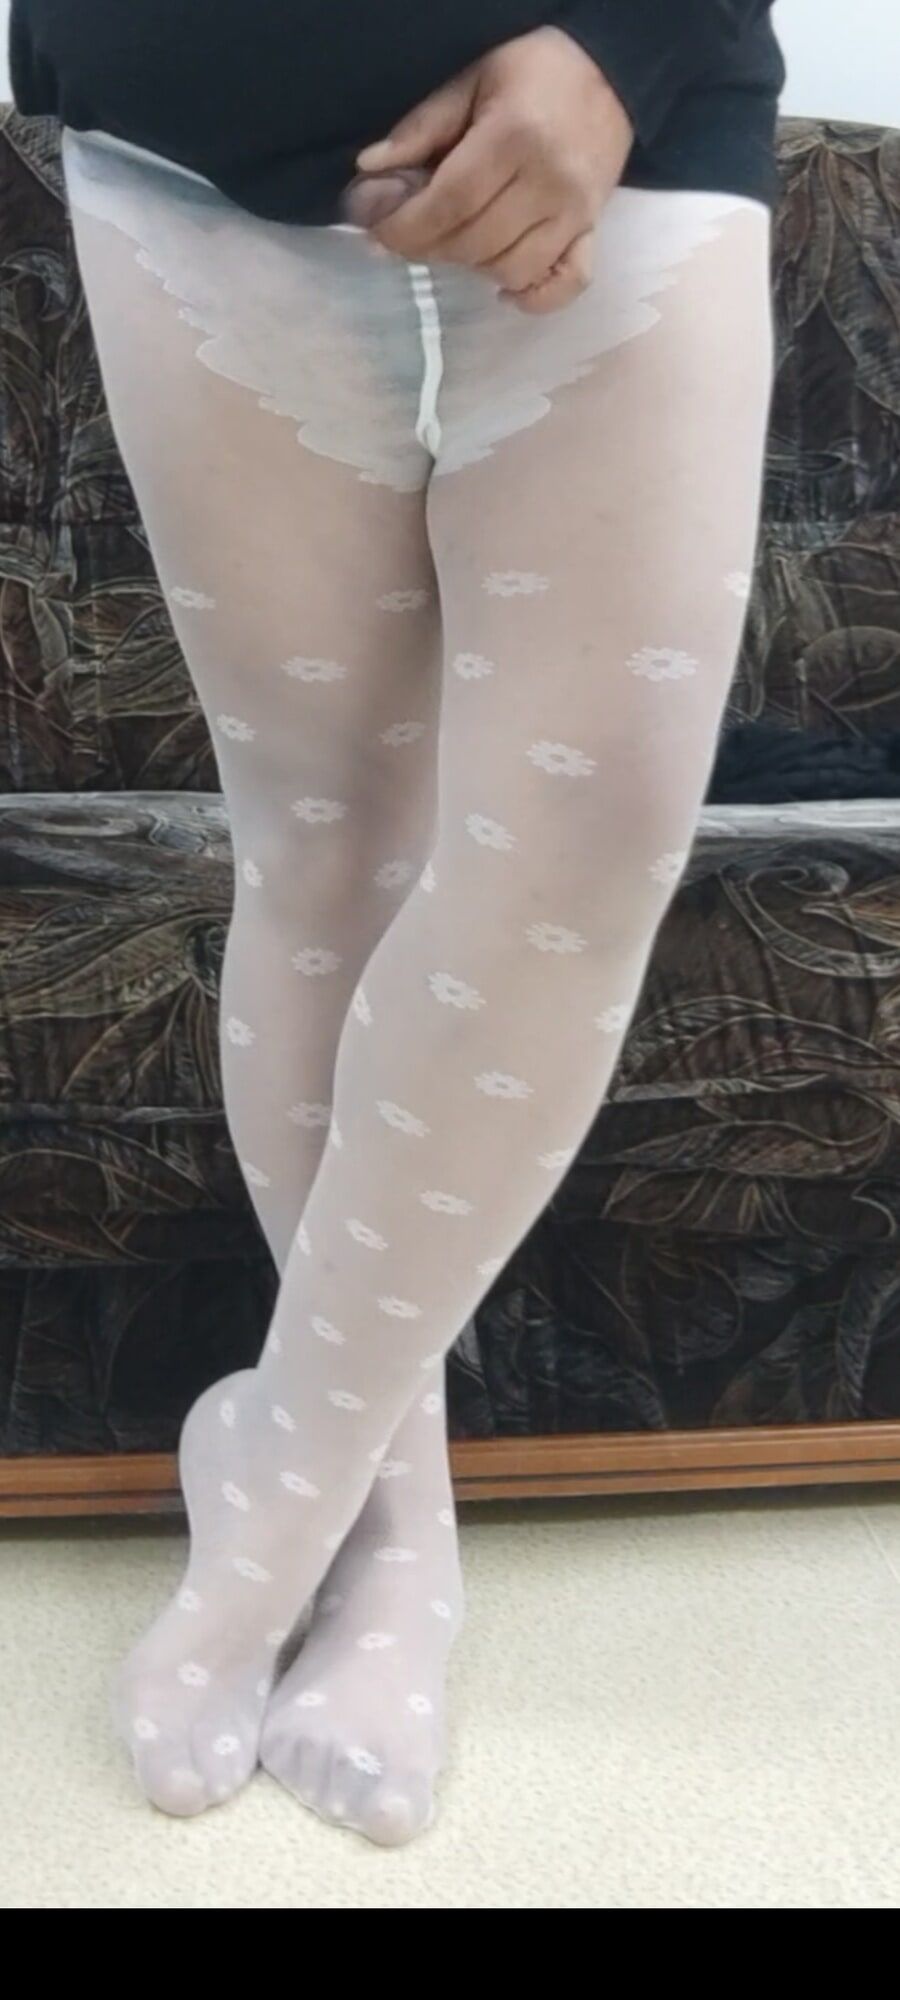 Another pair of white pantyhose on my feet,my favorites.